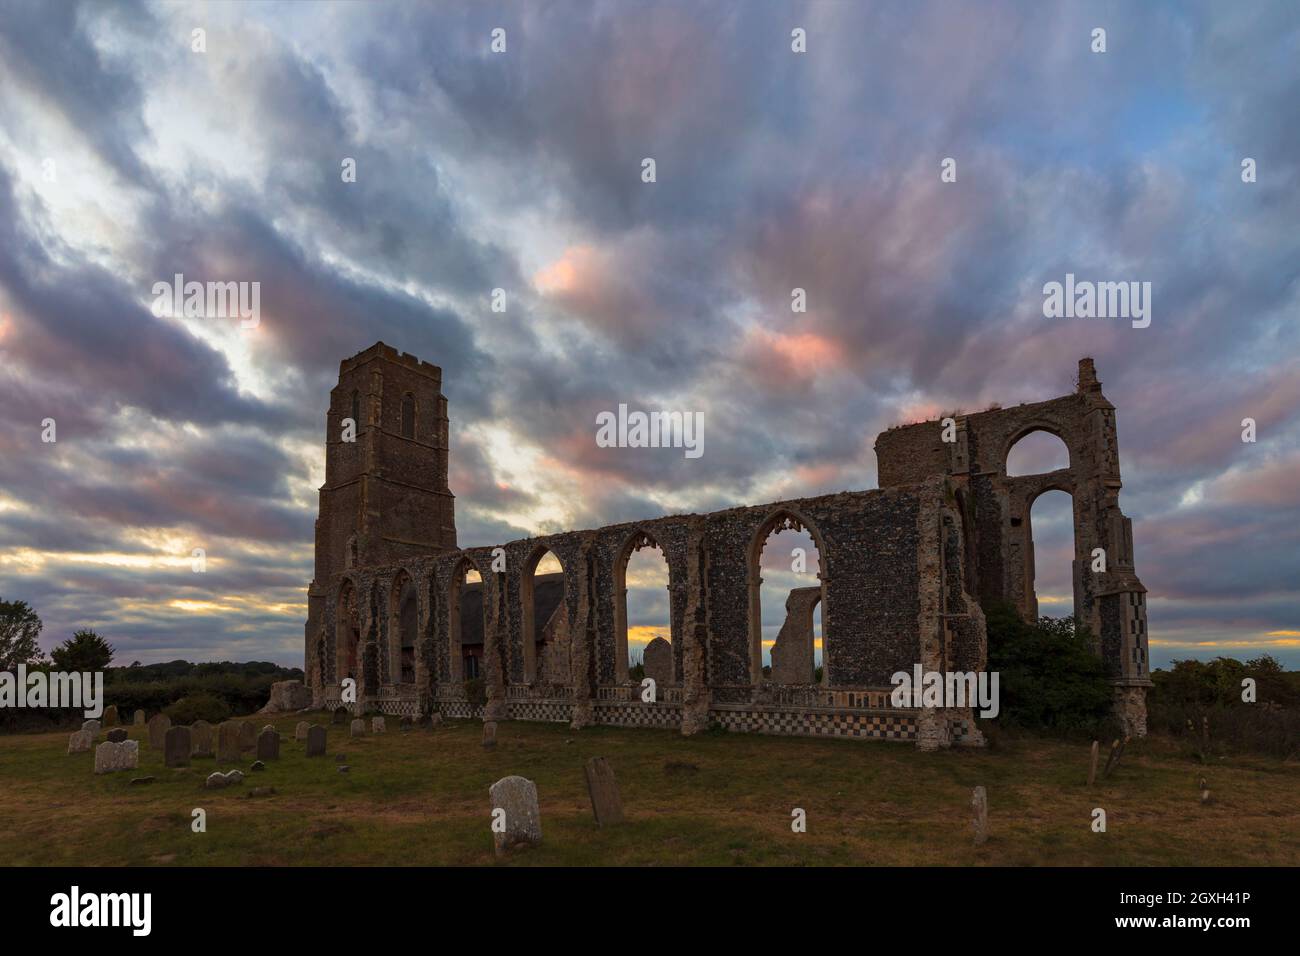 St Andrew's medieval Church, Covehithe, Suffolk, England, UK. Stock Photo